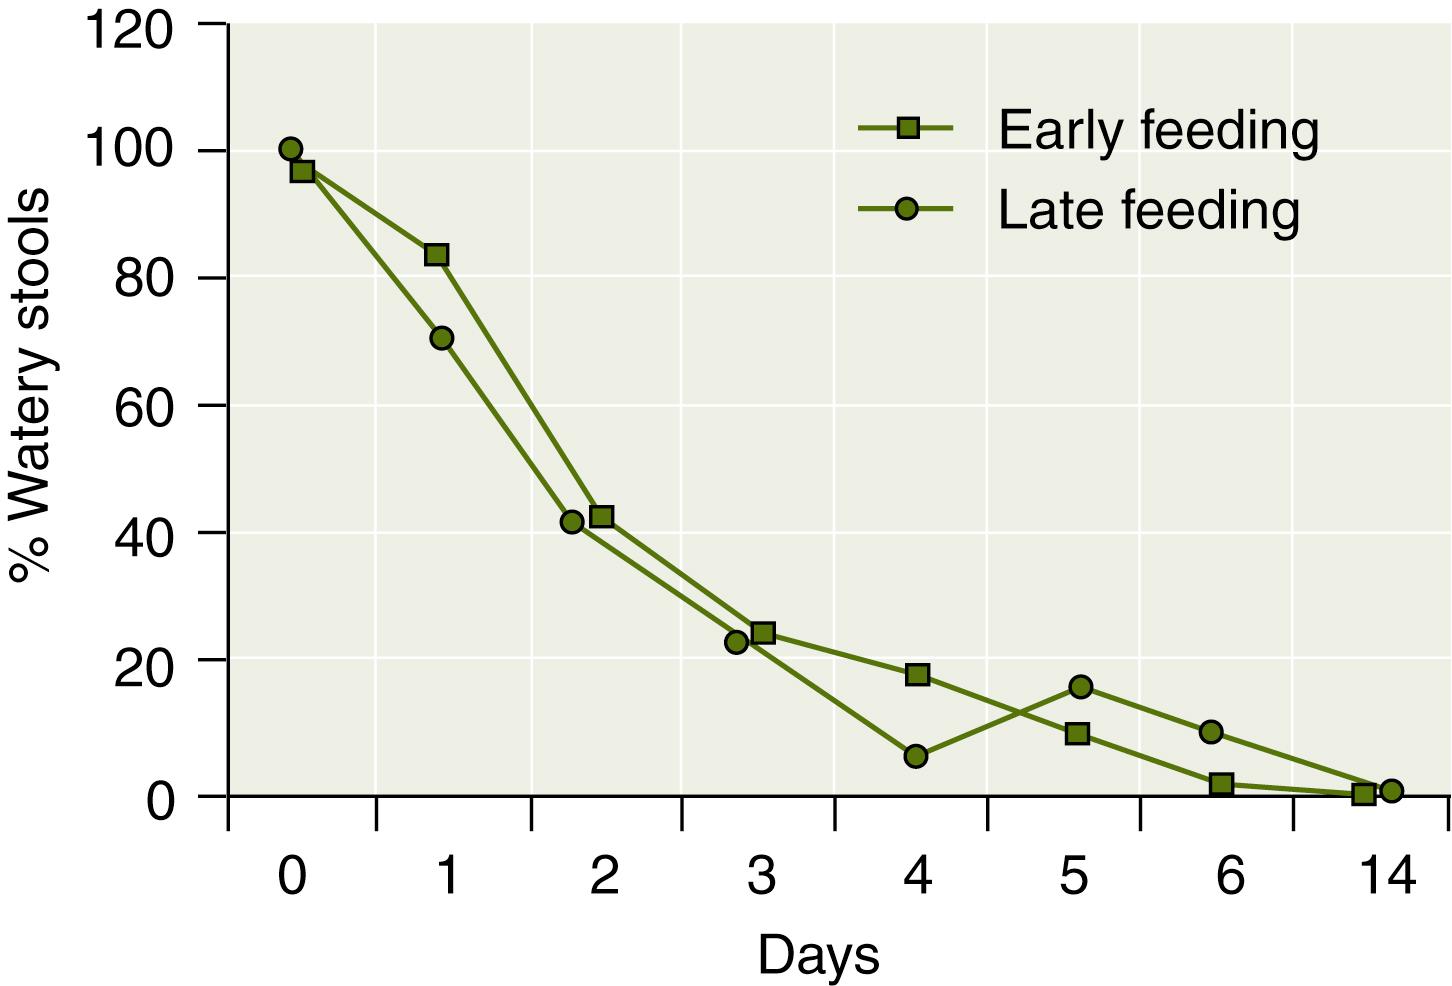 Fig. 90.4, Frequency of watery stools between early feeding group and late feeding group (European Society of Paediatric Gastroenterology, Hepatology and Nutrition study).